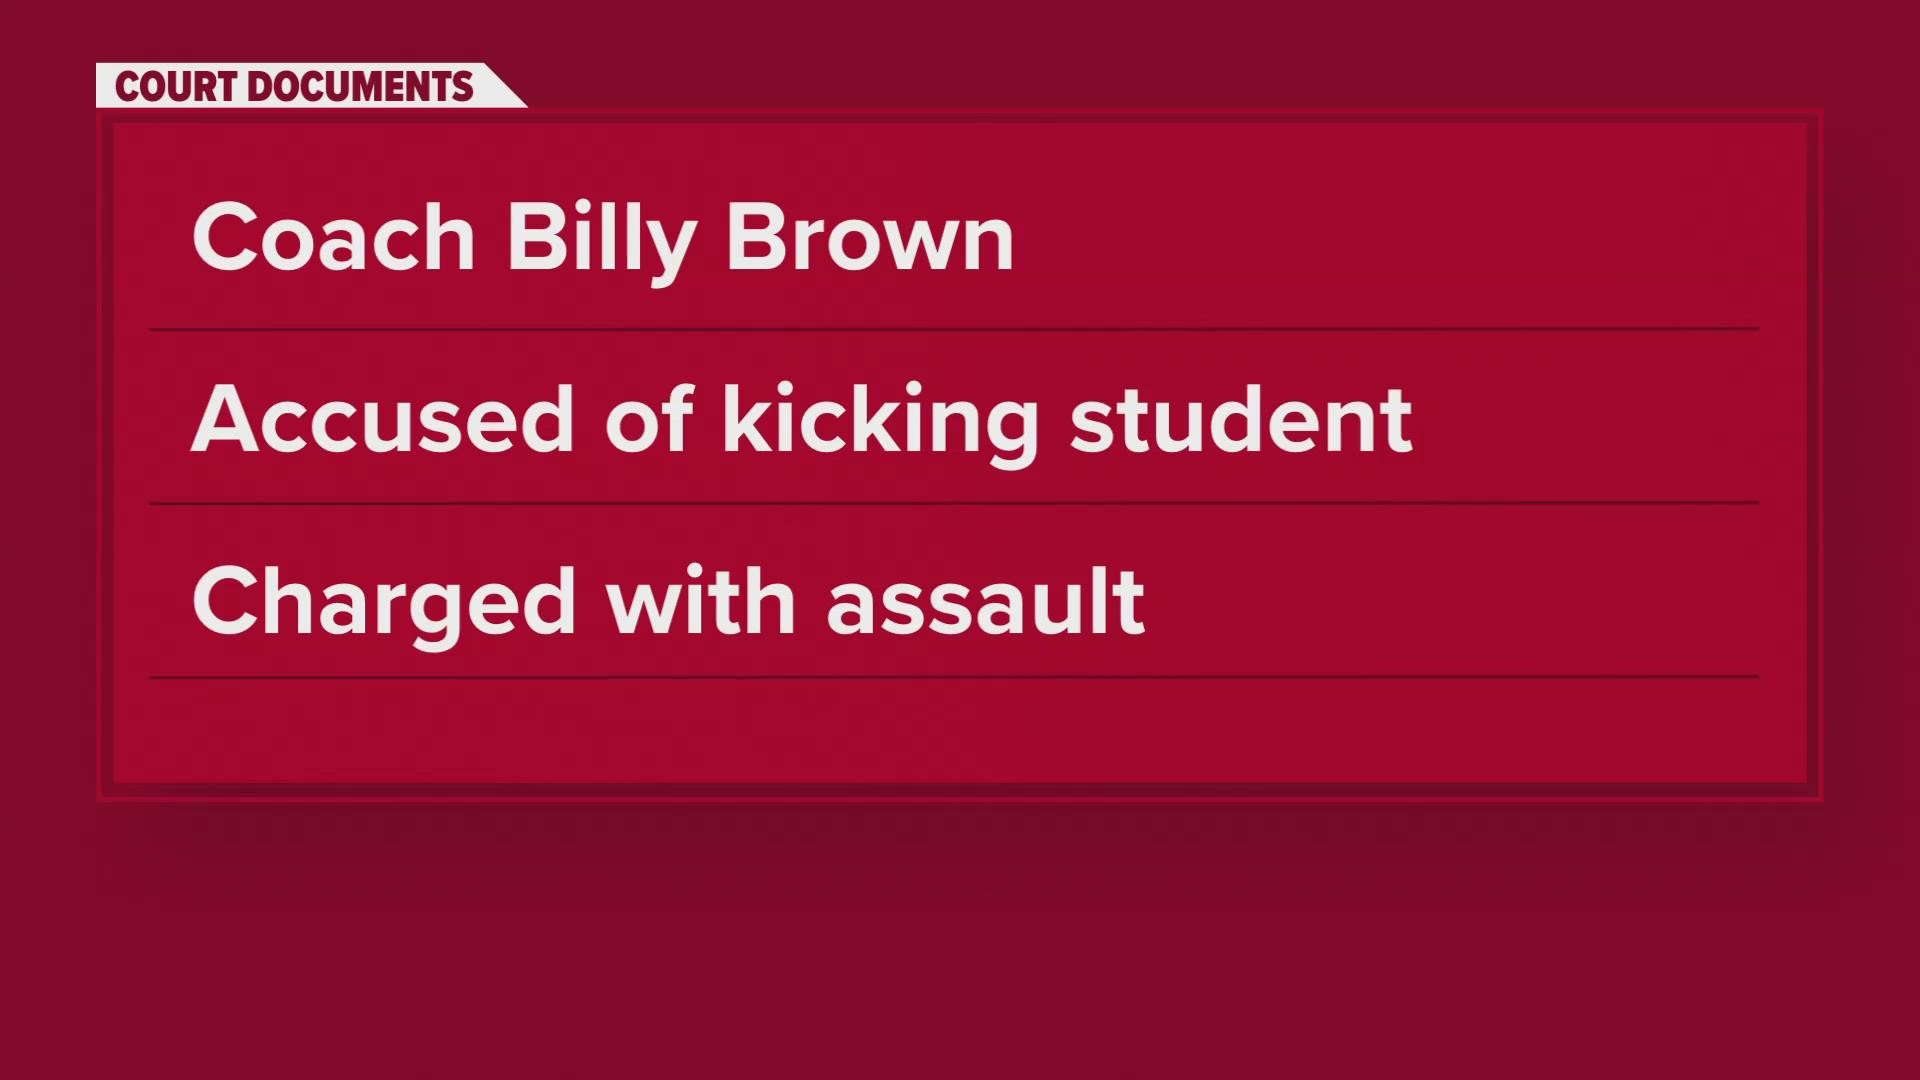 Austin High School Baseball Coach Billy Brown was arrested on Feb. 7. Brown is accused of kicking a student in the face and was charged with assault